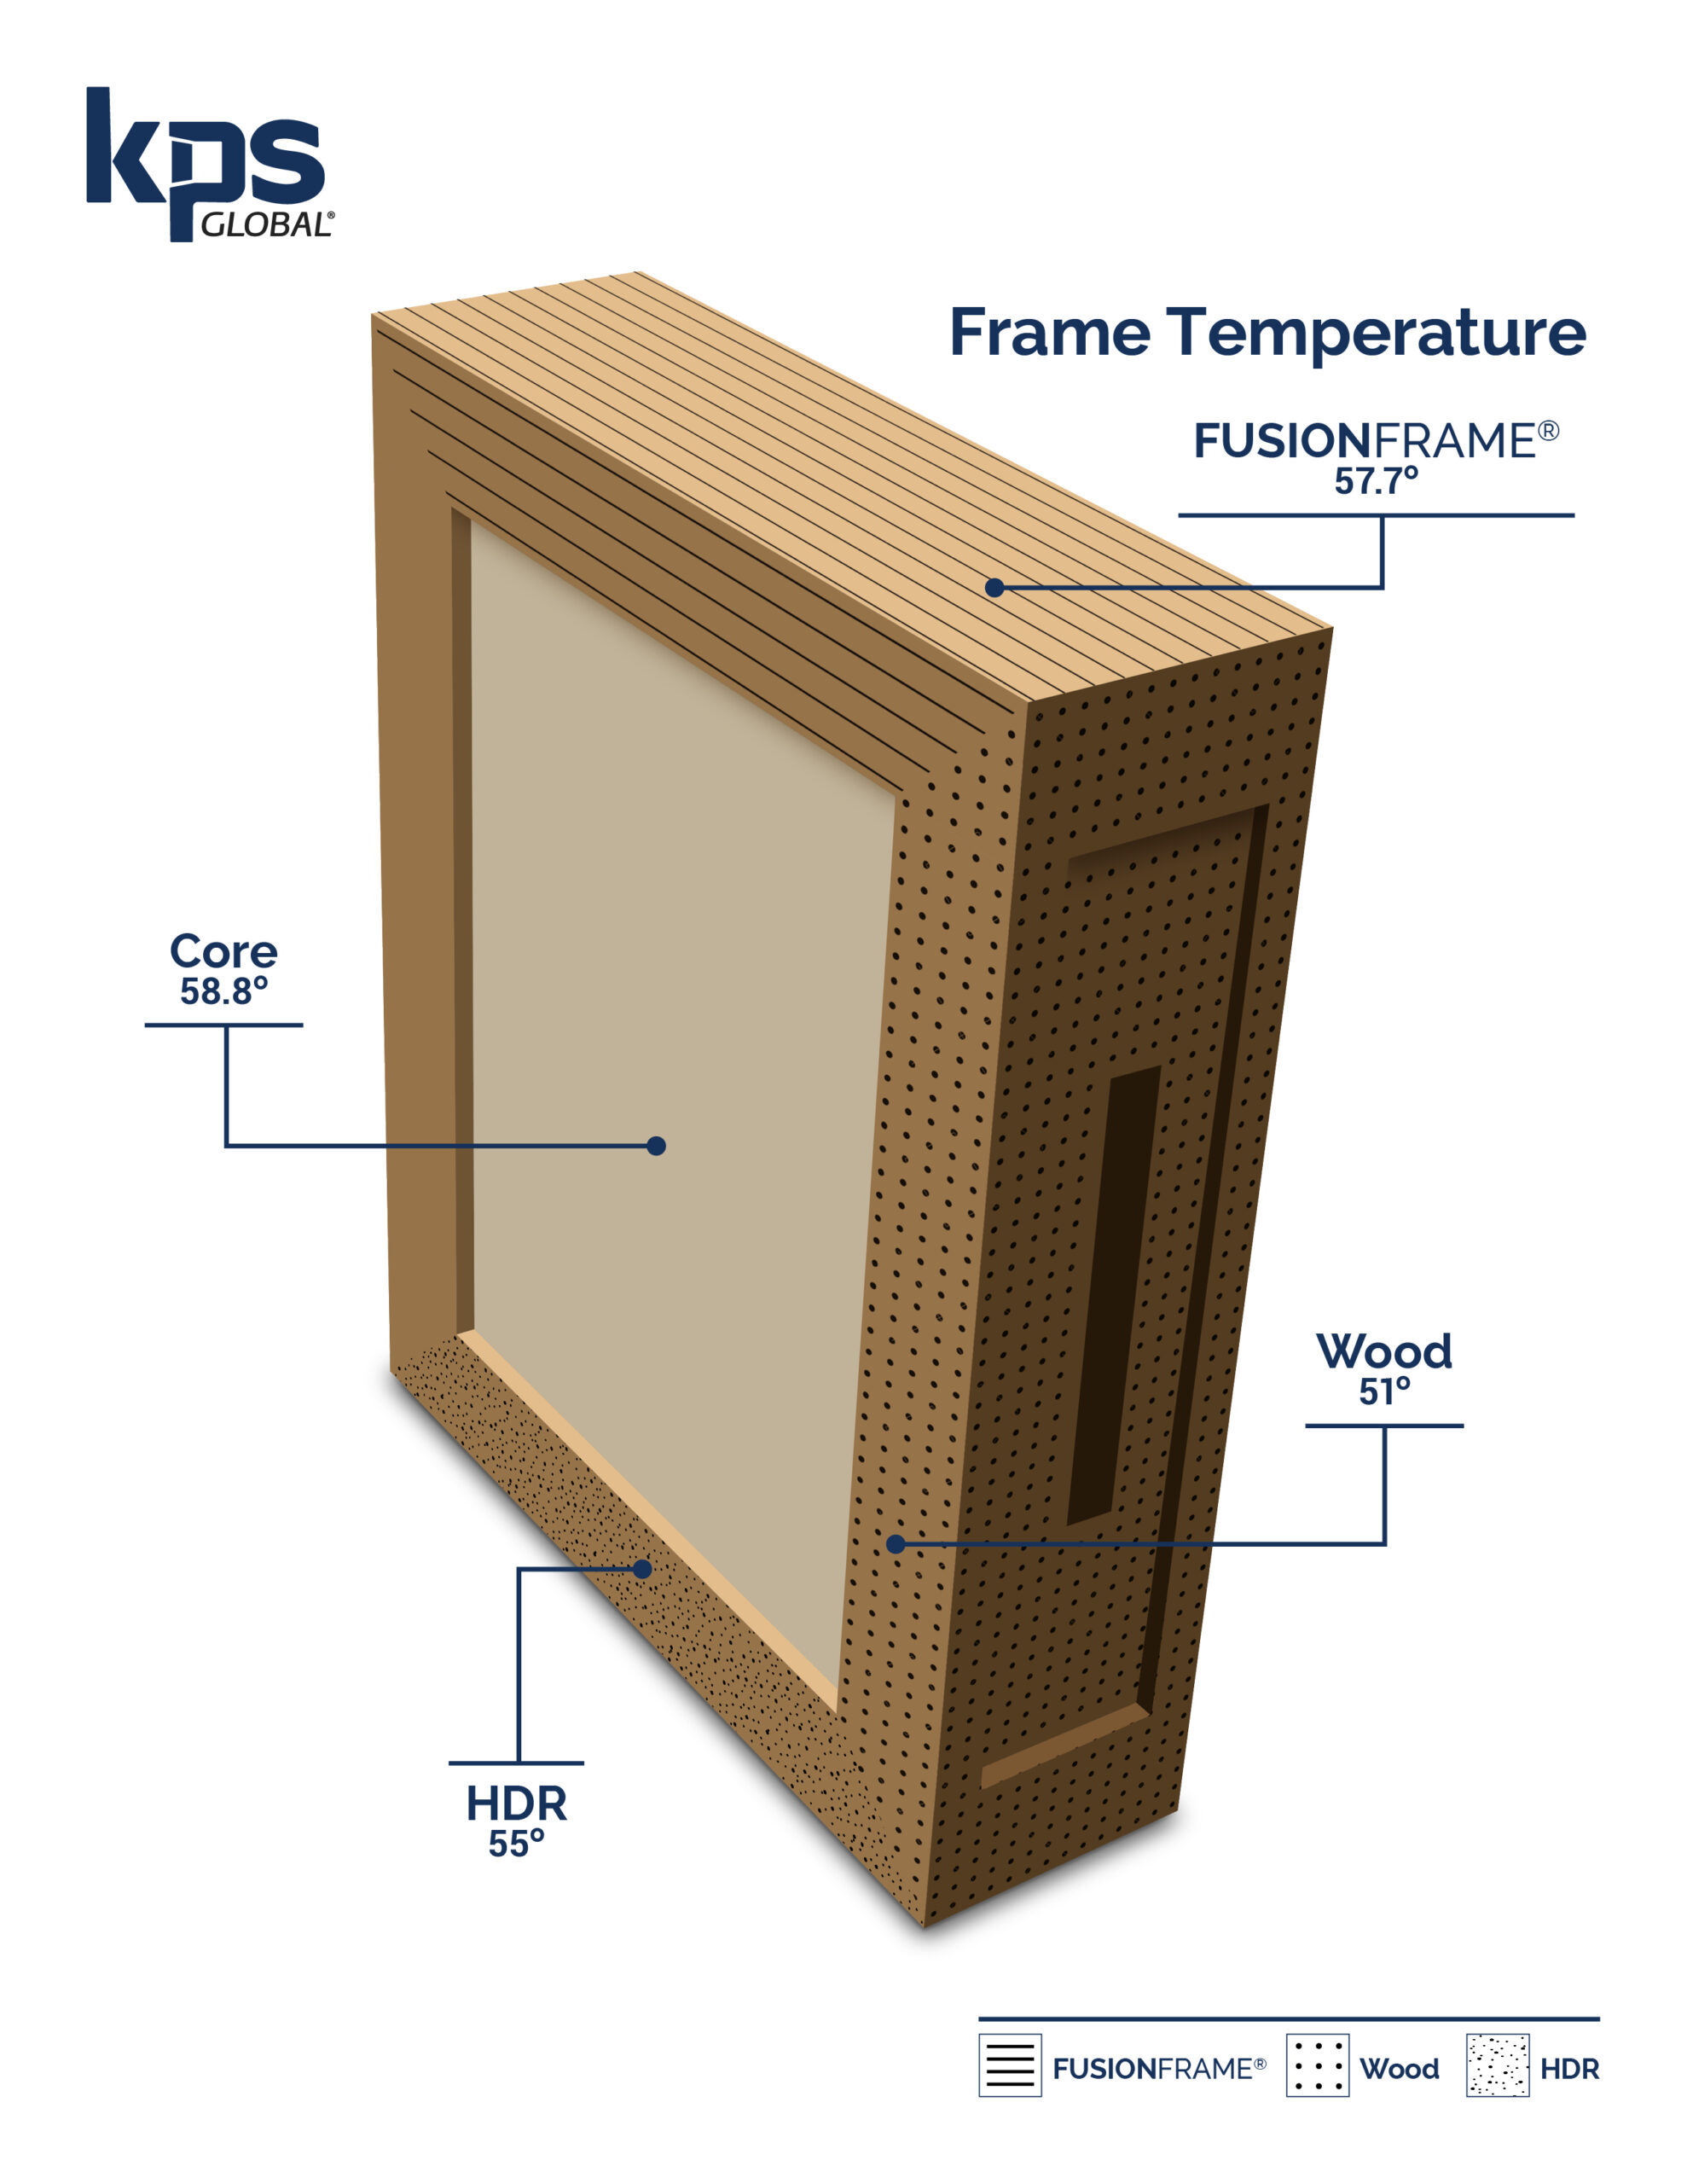 Small insulated panel showing the temperature of the core polyurethane foam as well as FUSIONFRAME vs HDR vs Wood frame options.